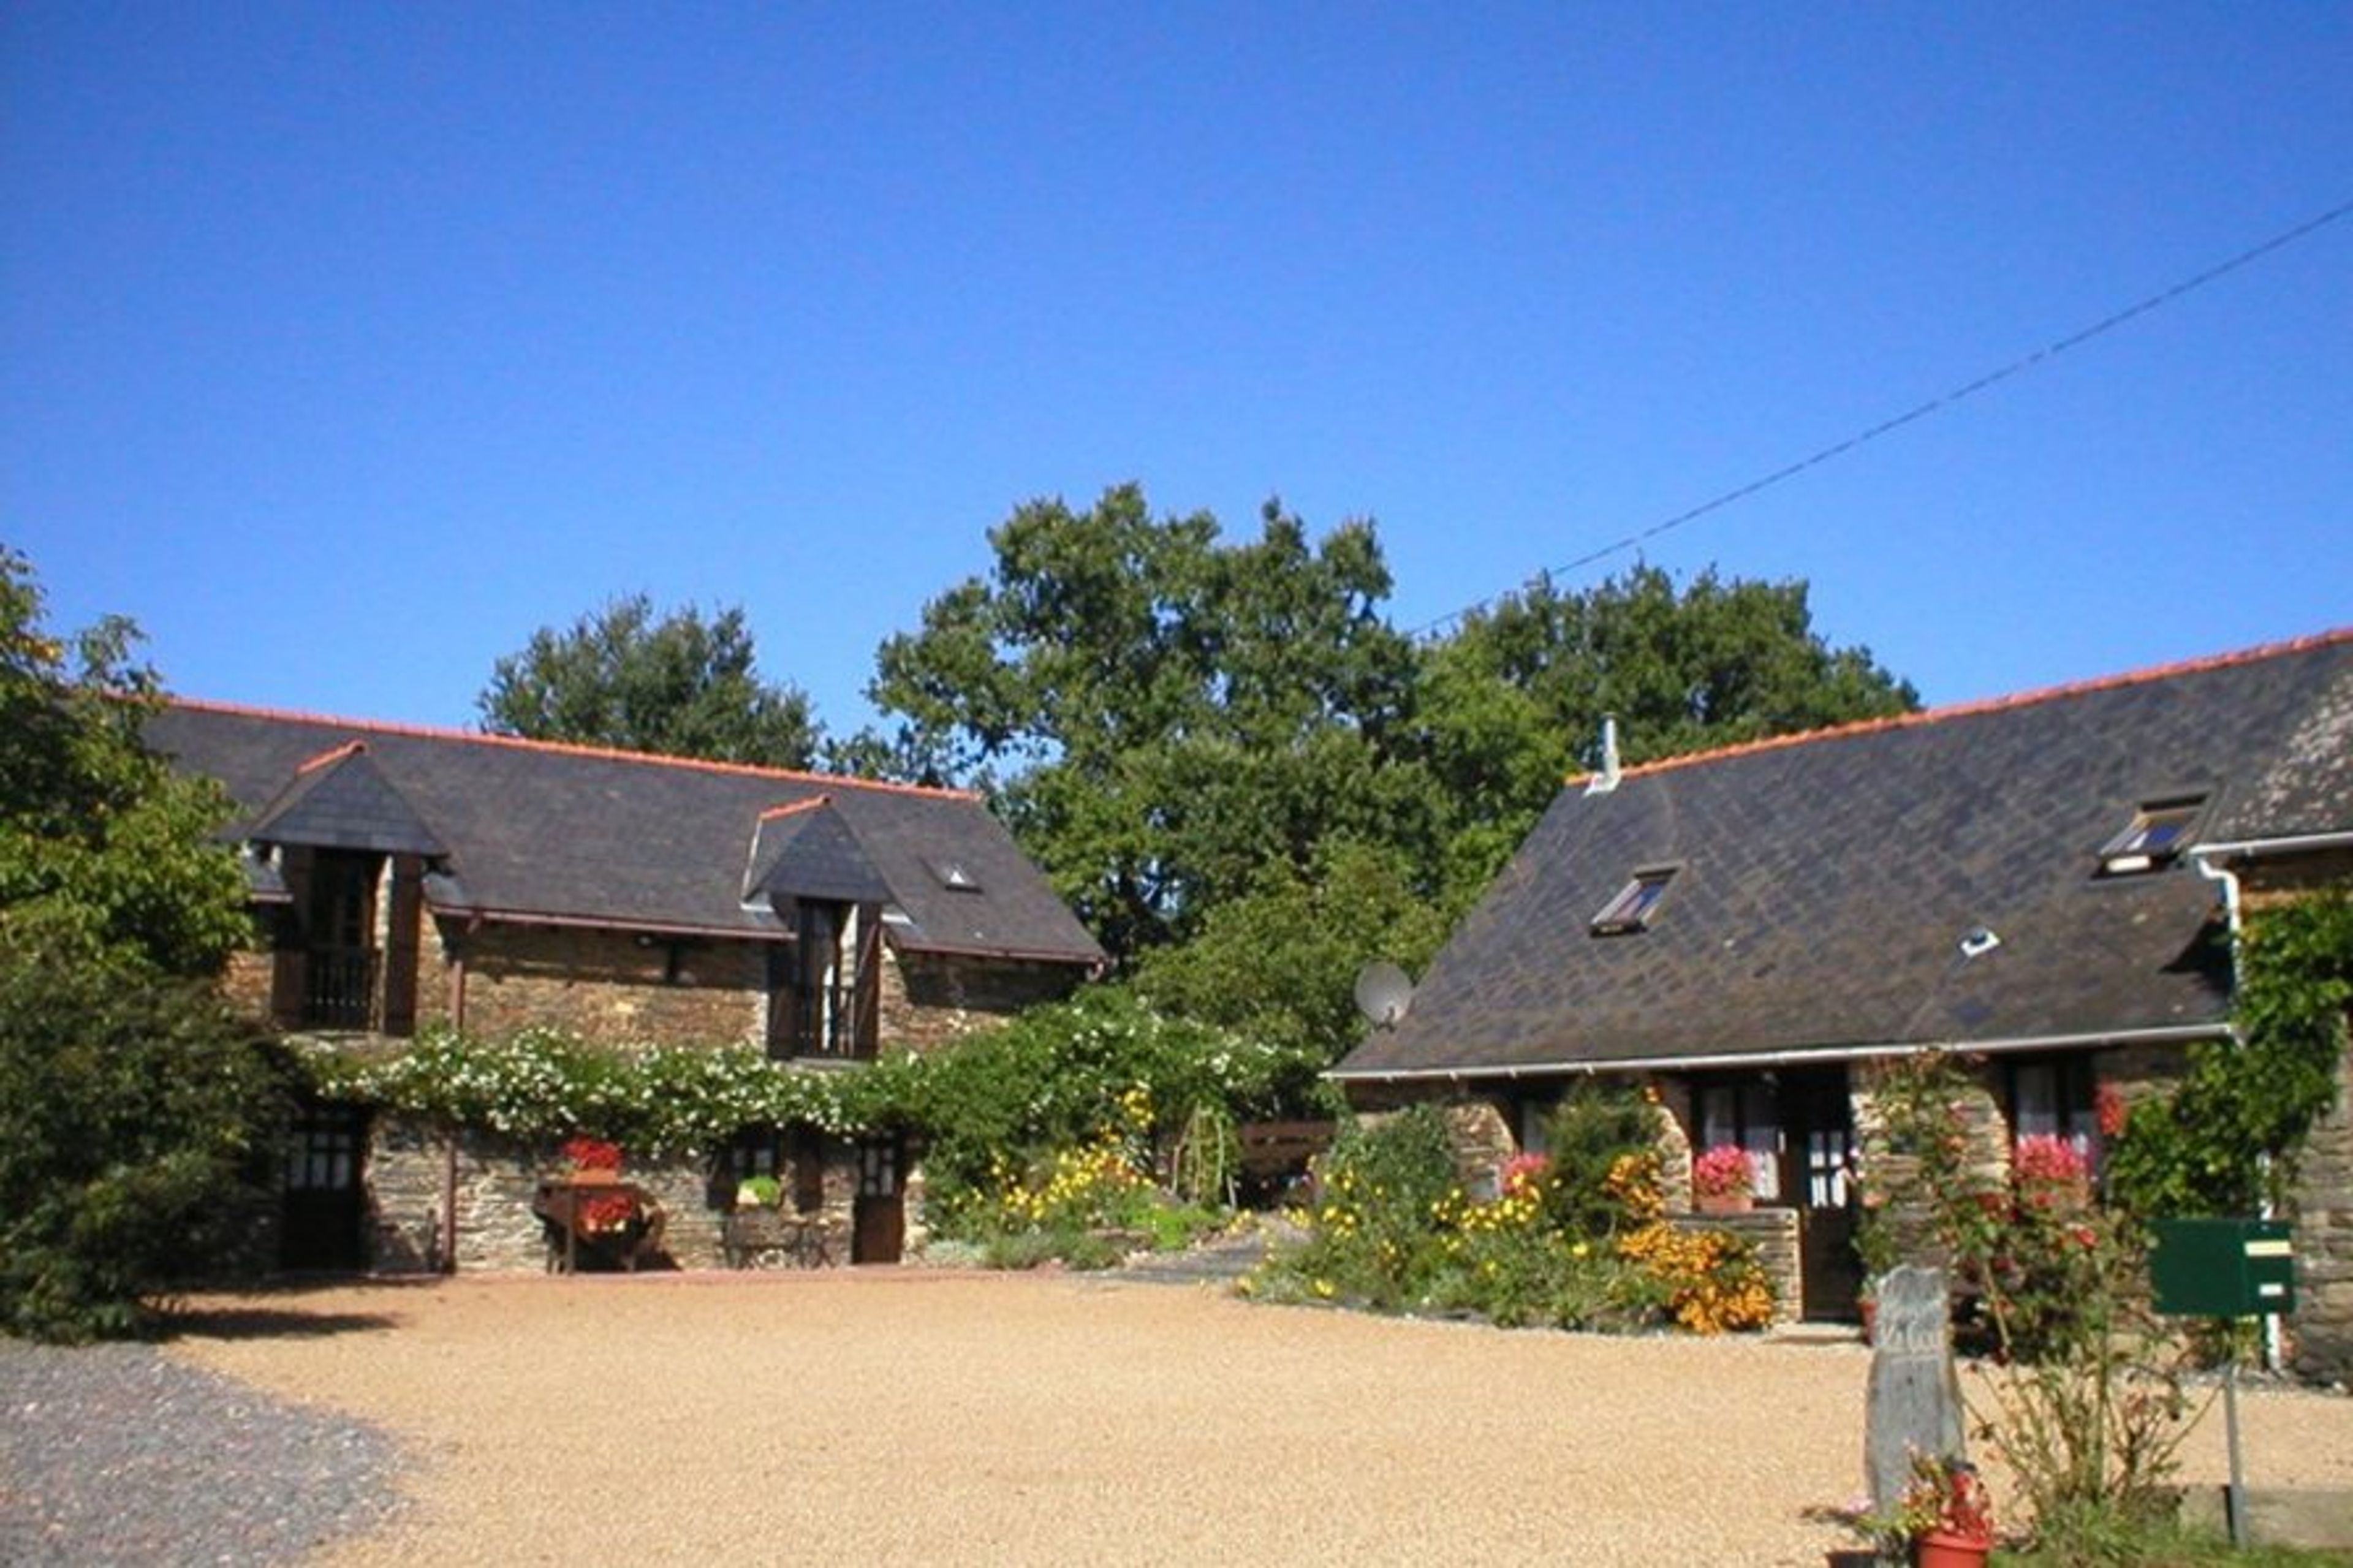 South Brittany Cottages